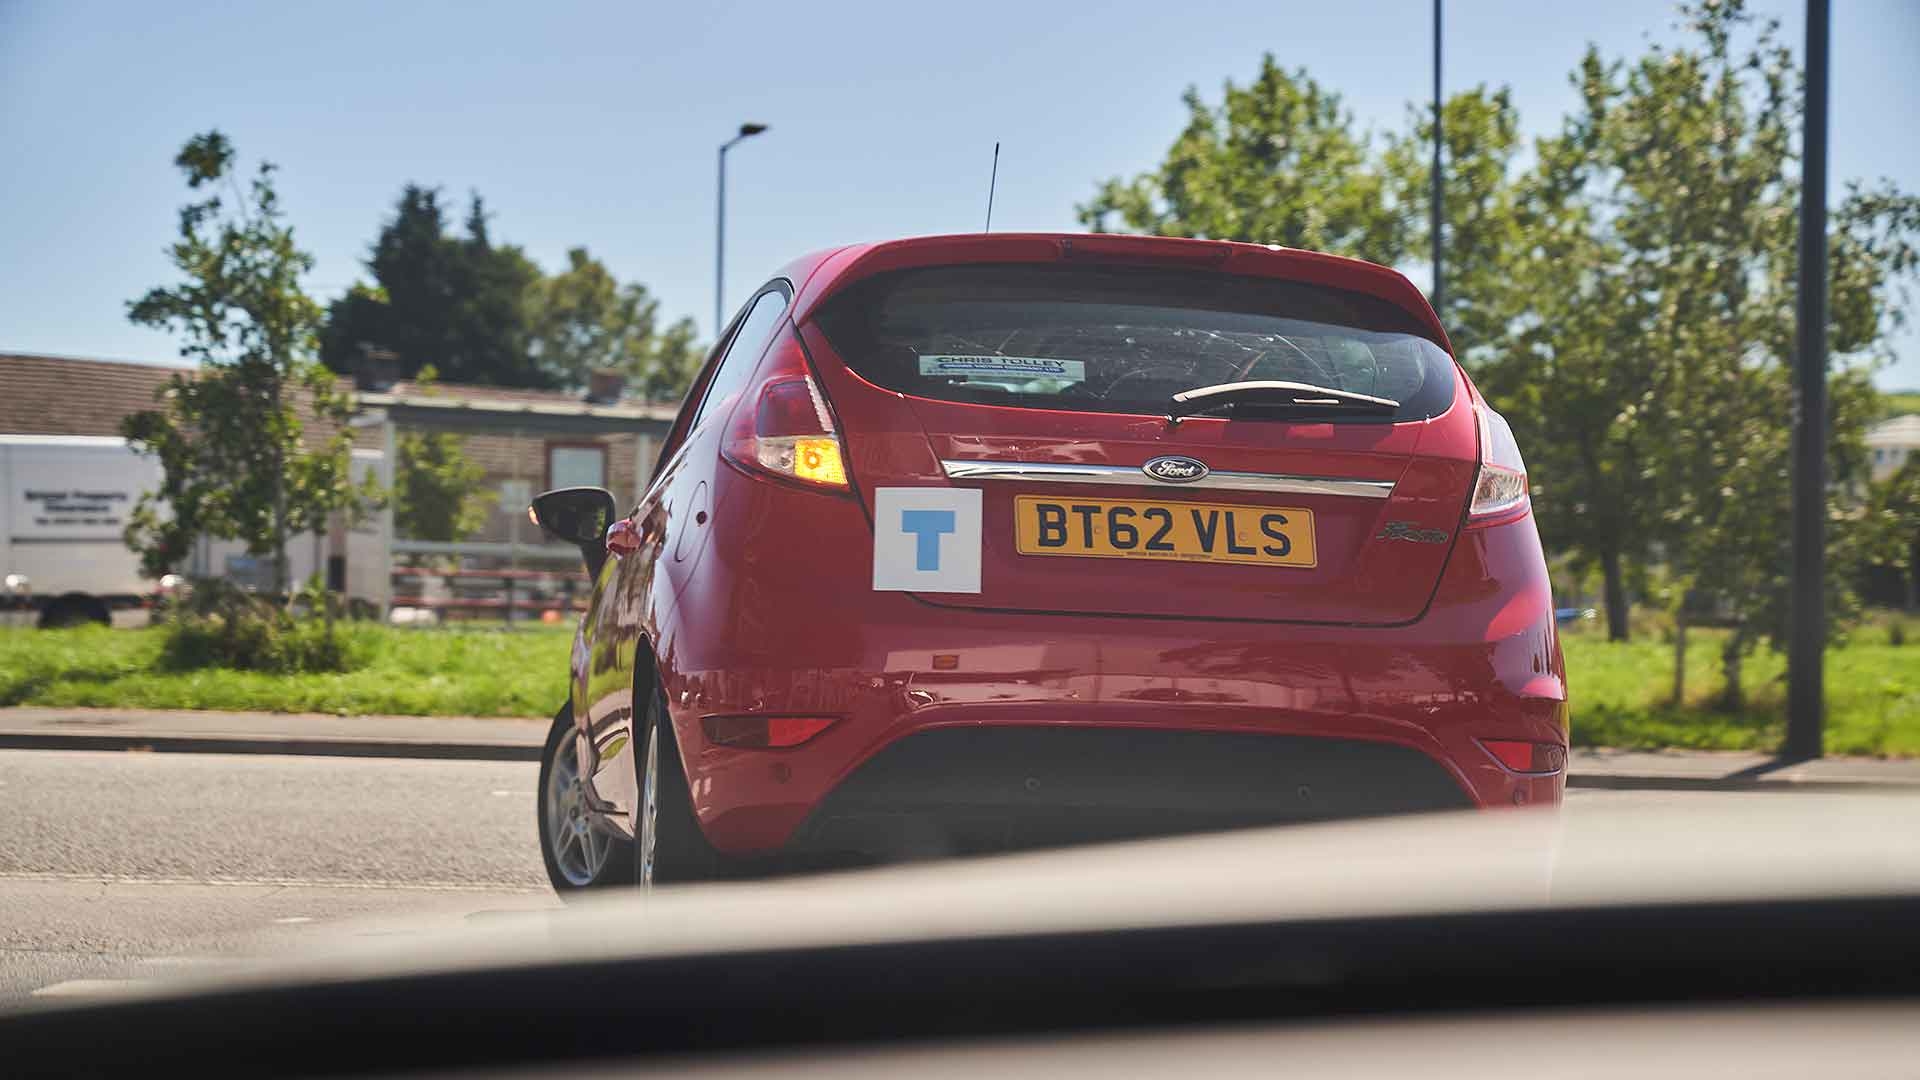 T-plates for young drivers